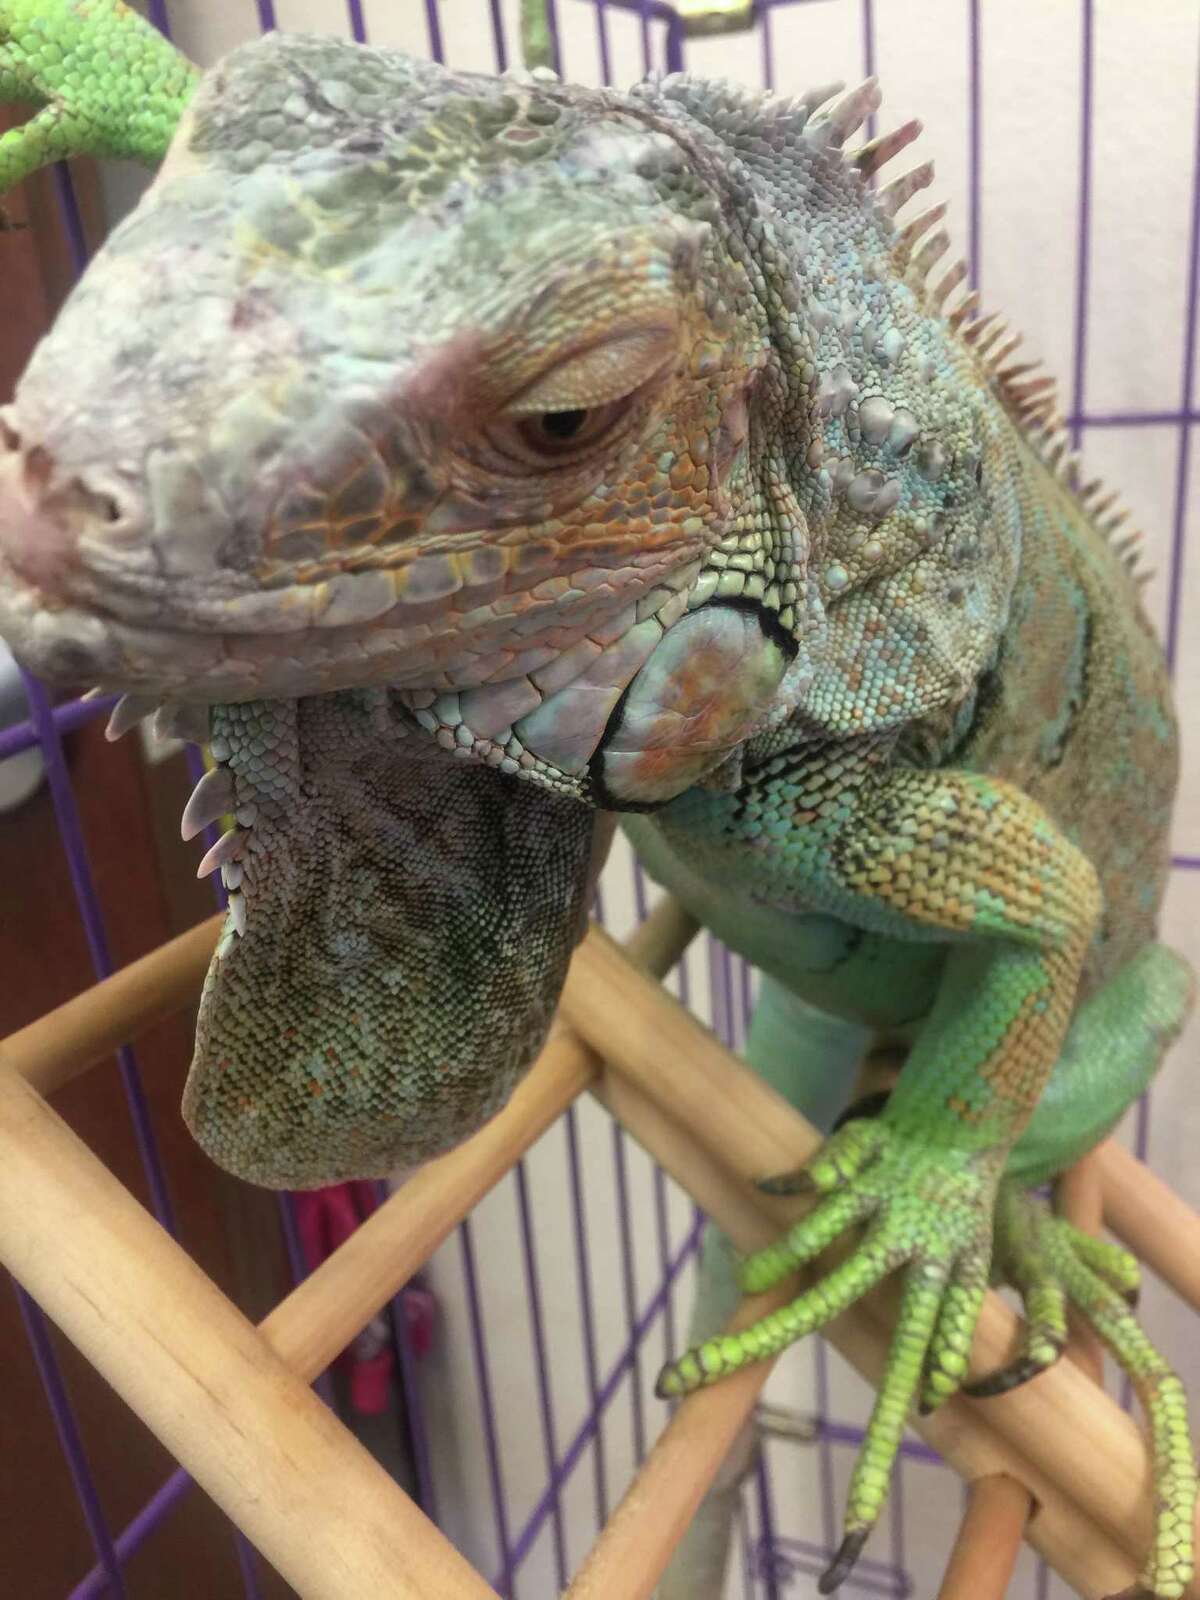 Leonidas the iguana was found marching down the middle of a San Antonio street on the Northwest Side on Feb. 22, 2017. A woman who helped shepherd the 2-foot-long reptile onto a neighbor's lawn called Animal Care Services; an ACS officer rescued the iguana from the tree where it had climbed. ACS is looking for its owner.